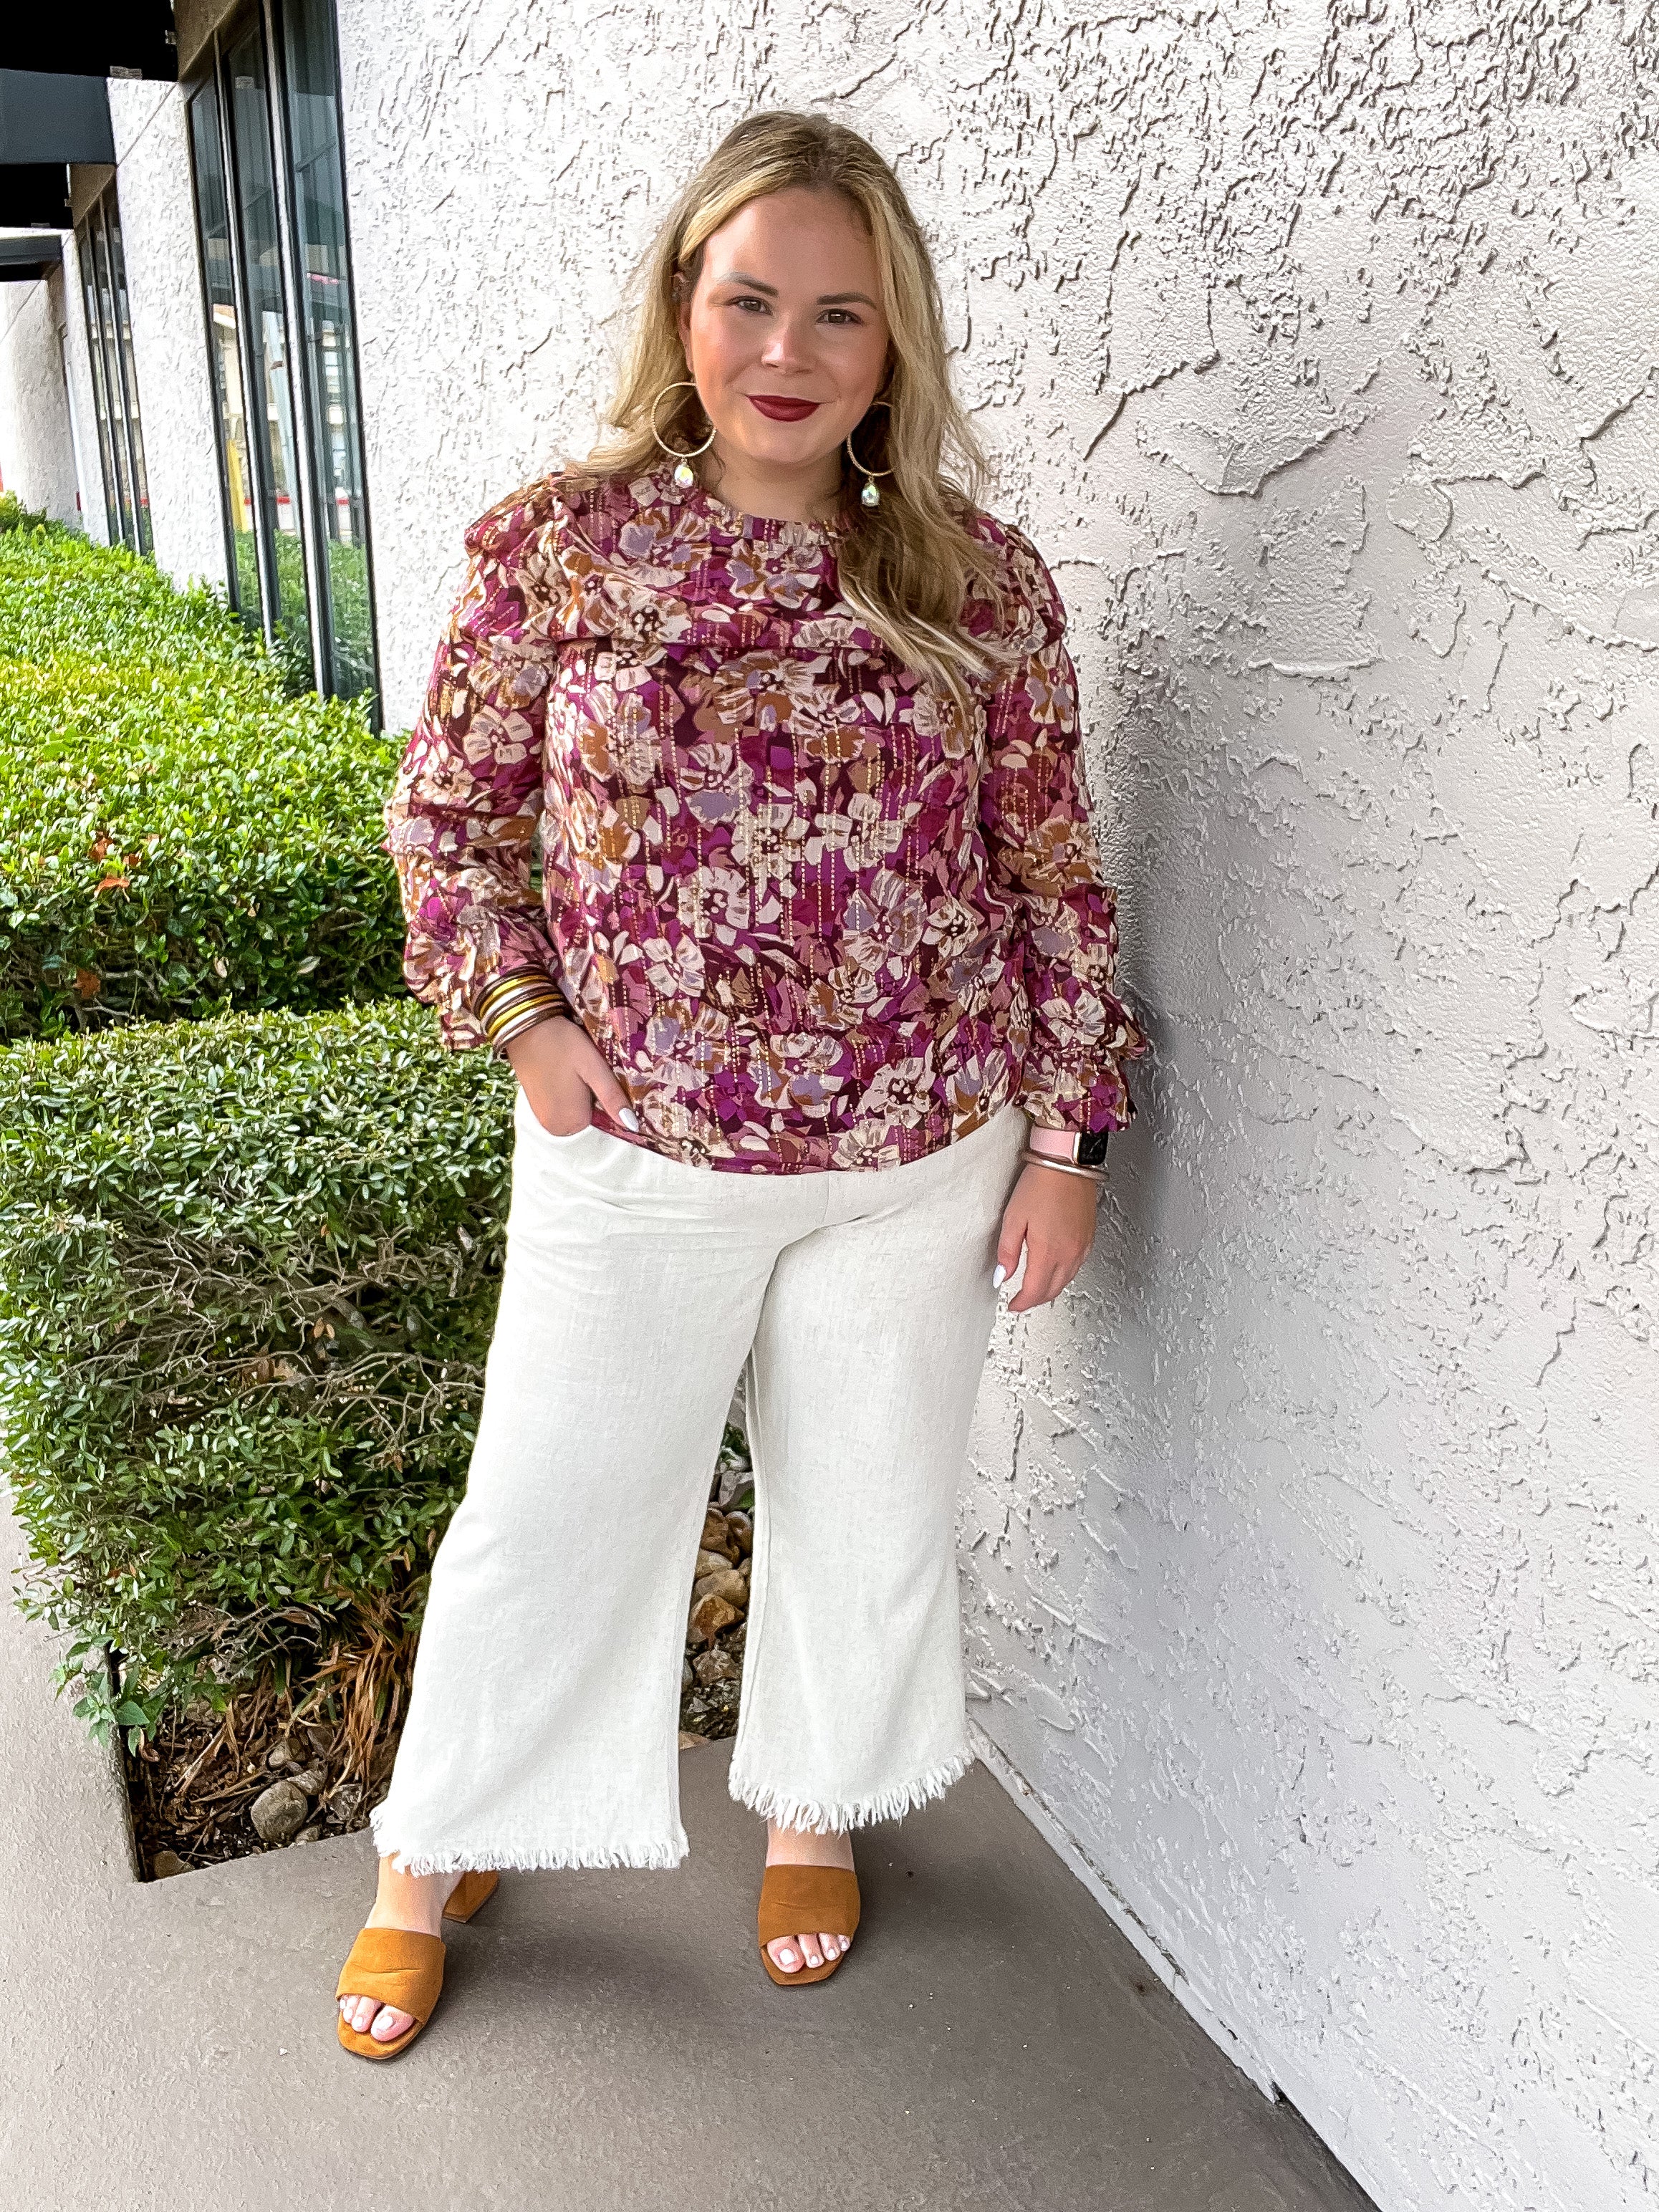 Counting Favors High Neck Floral Top with Long Sleeves in Magenta and Gold - Giddy Up Glamour Boutique